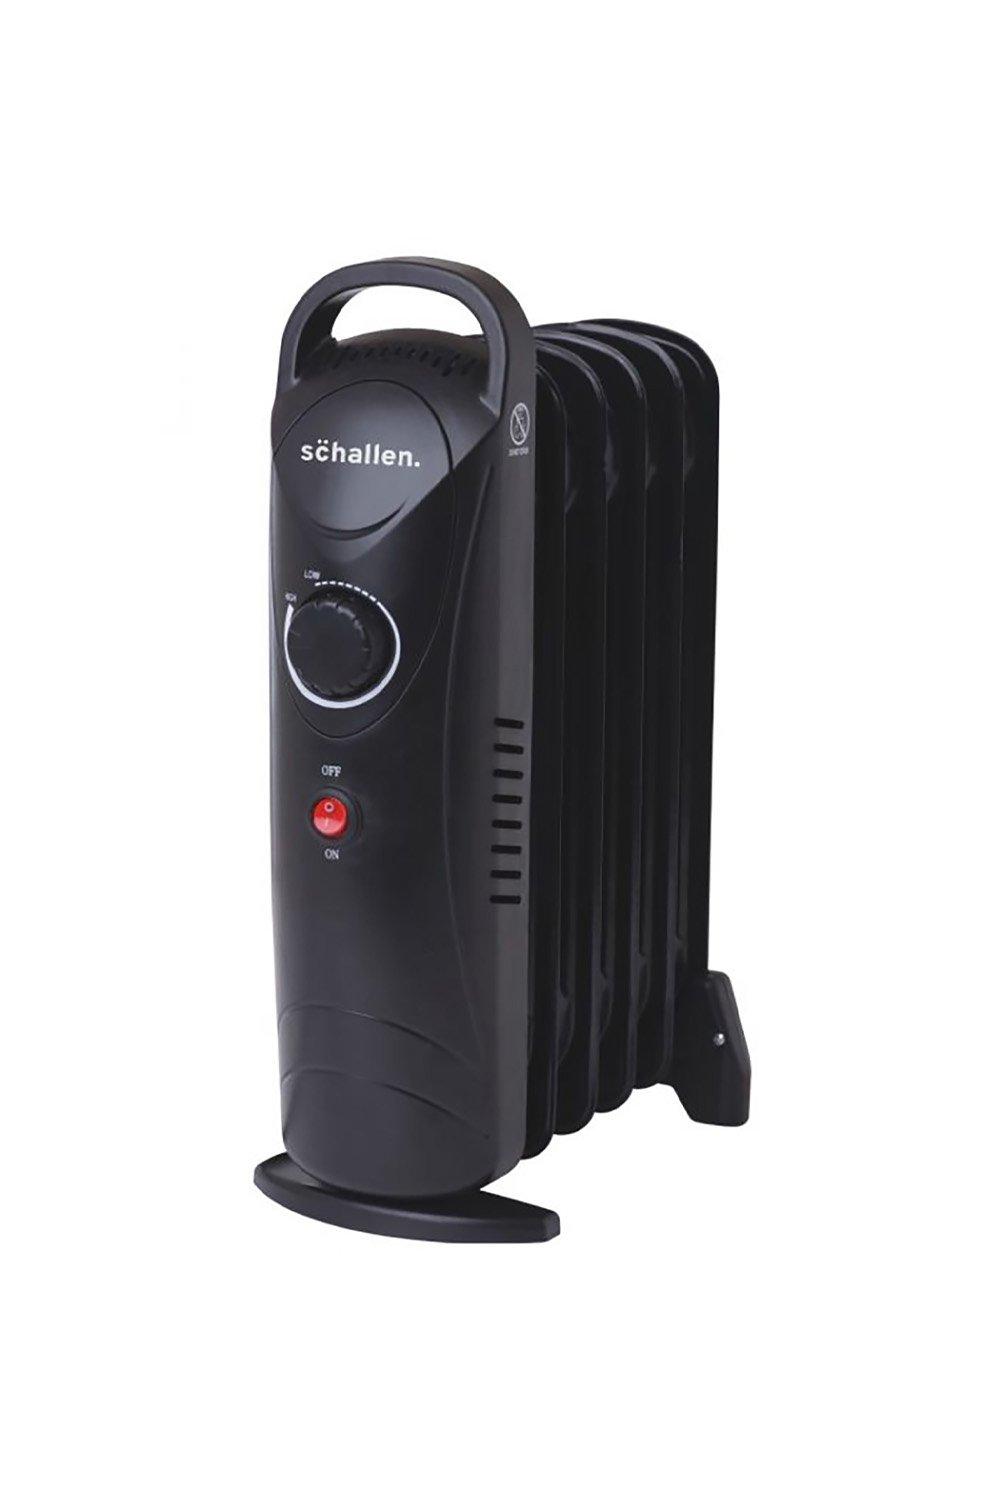 Portable Electric Slim Oil Filled Radiator Heater with Adjustable Temperature Thermostat